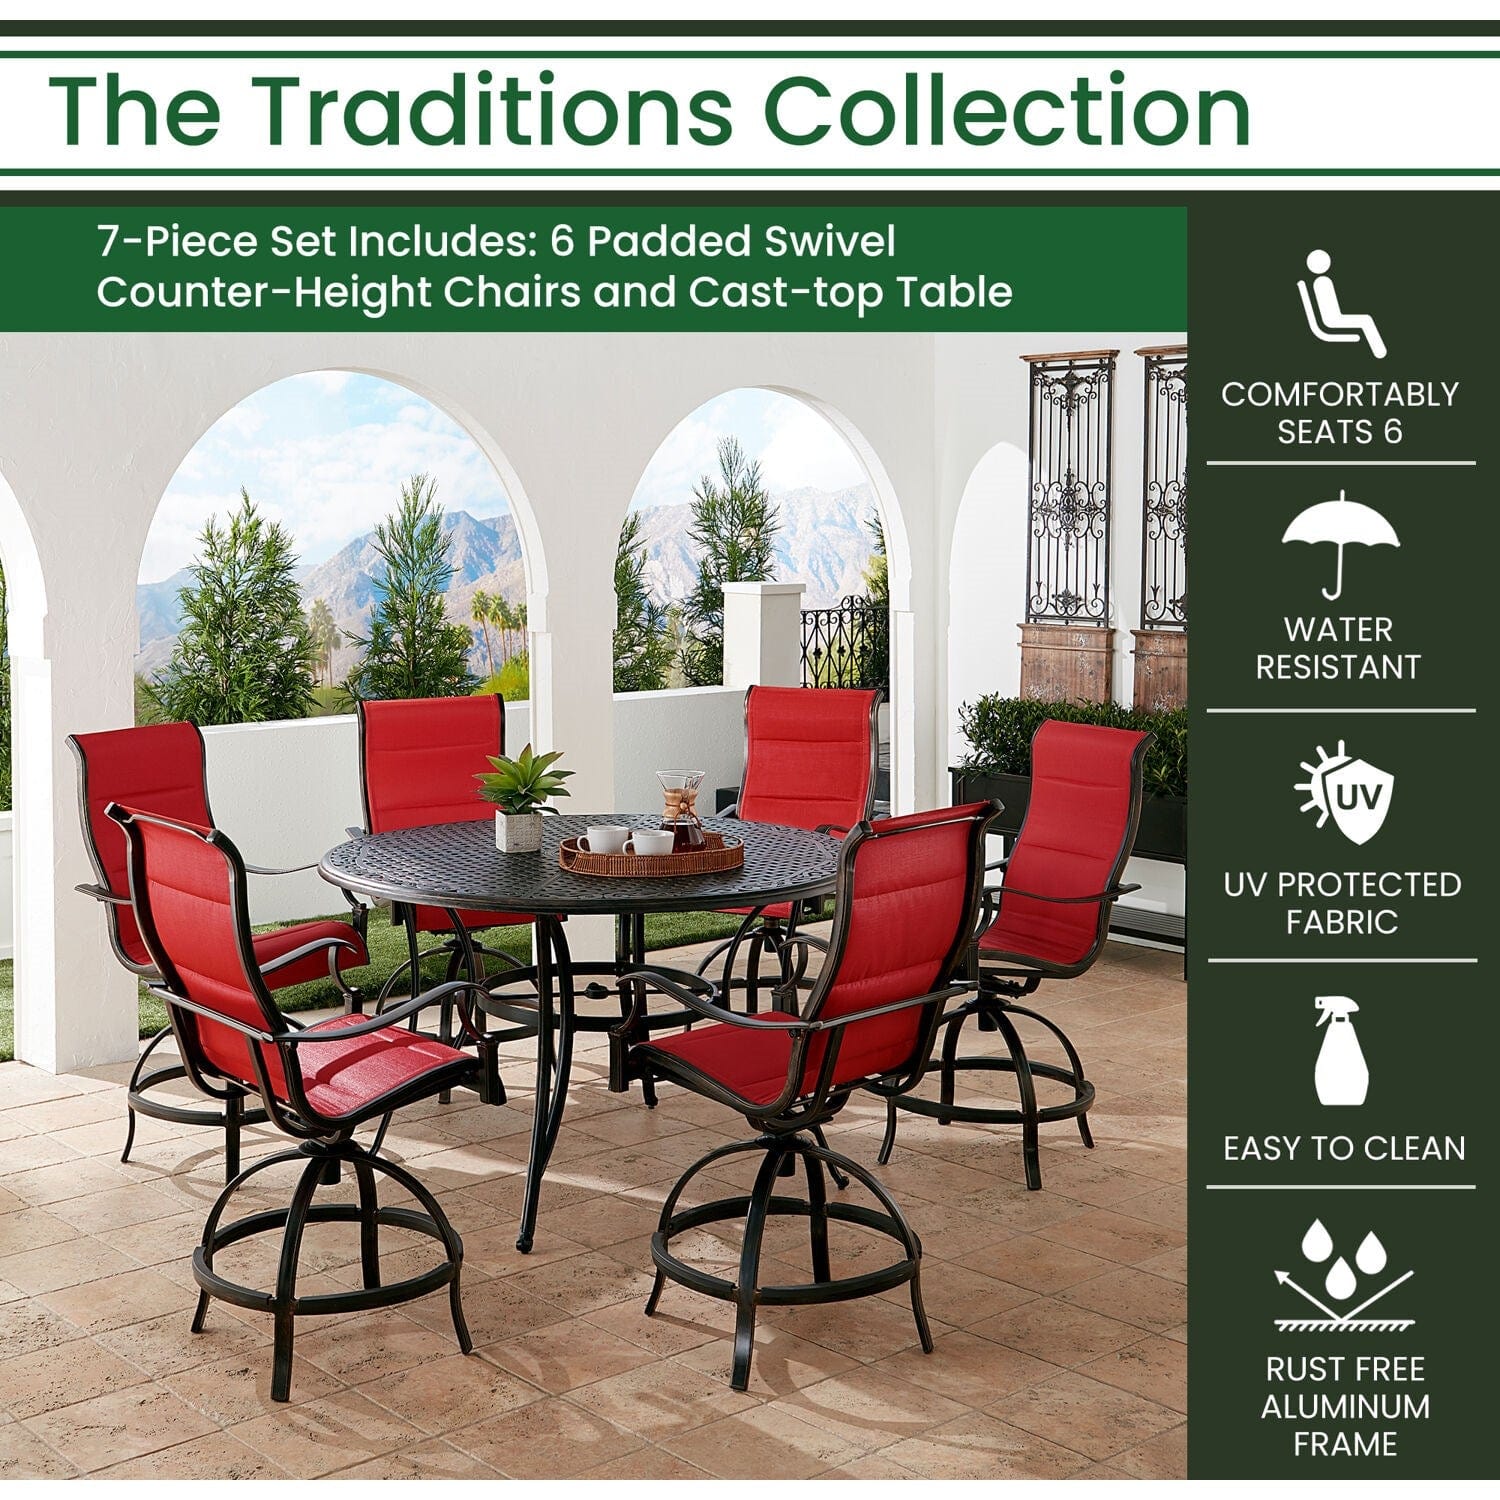 Hanover Outdoor Dining Set Hanover - Traditions 7-Piece Aluminum Frame High-Dining Set in Red with 6 Padded Swivel Counter-Height Chairs and 56-in. Cast-top Table | TRADDN7PCPDBR-RED